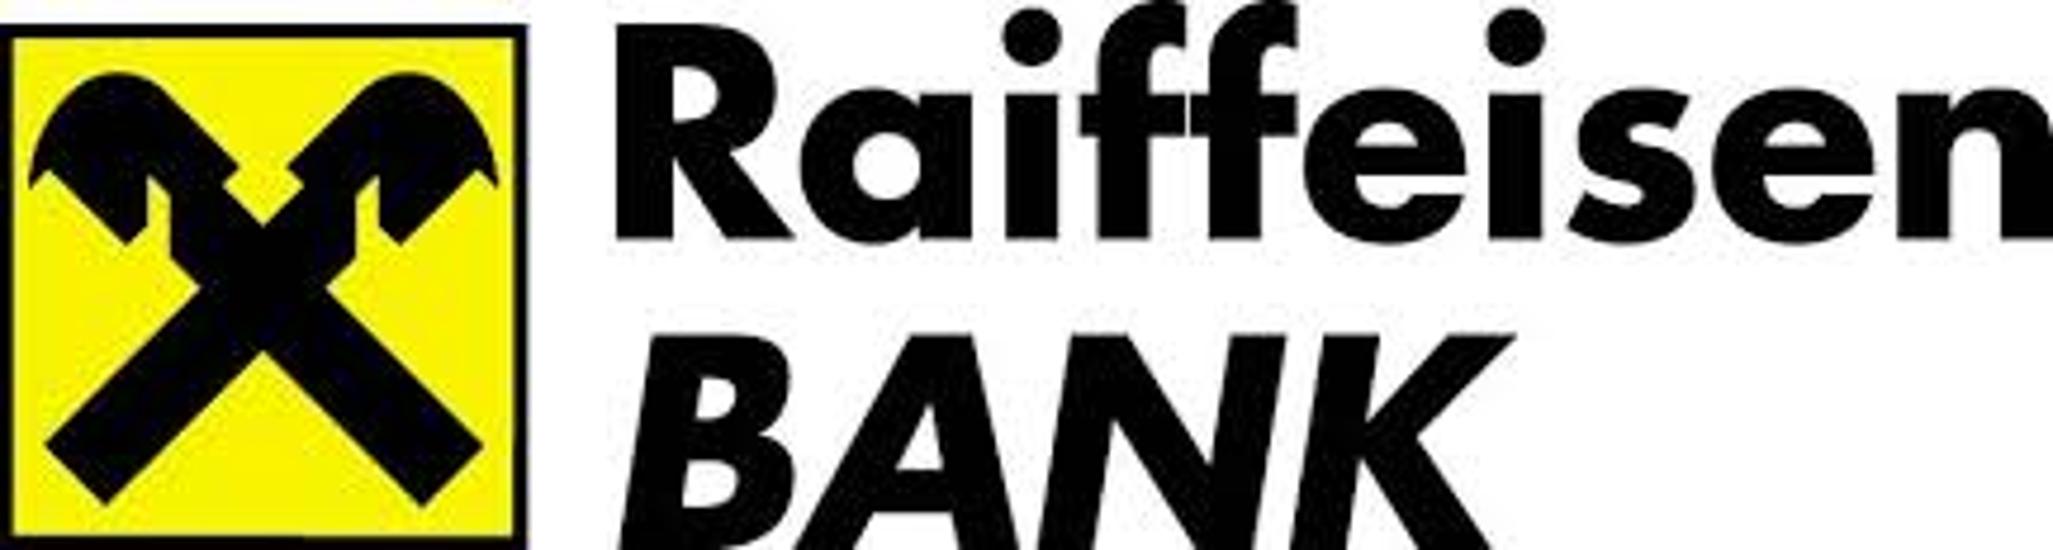 Raiffeisen To Close 45 Branches In Hungary